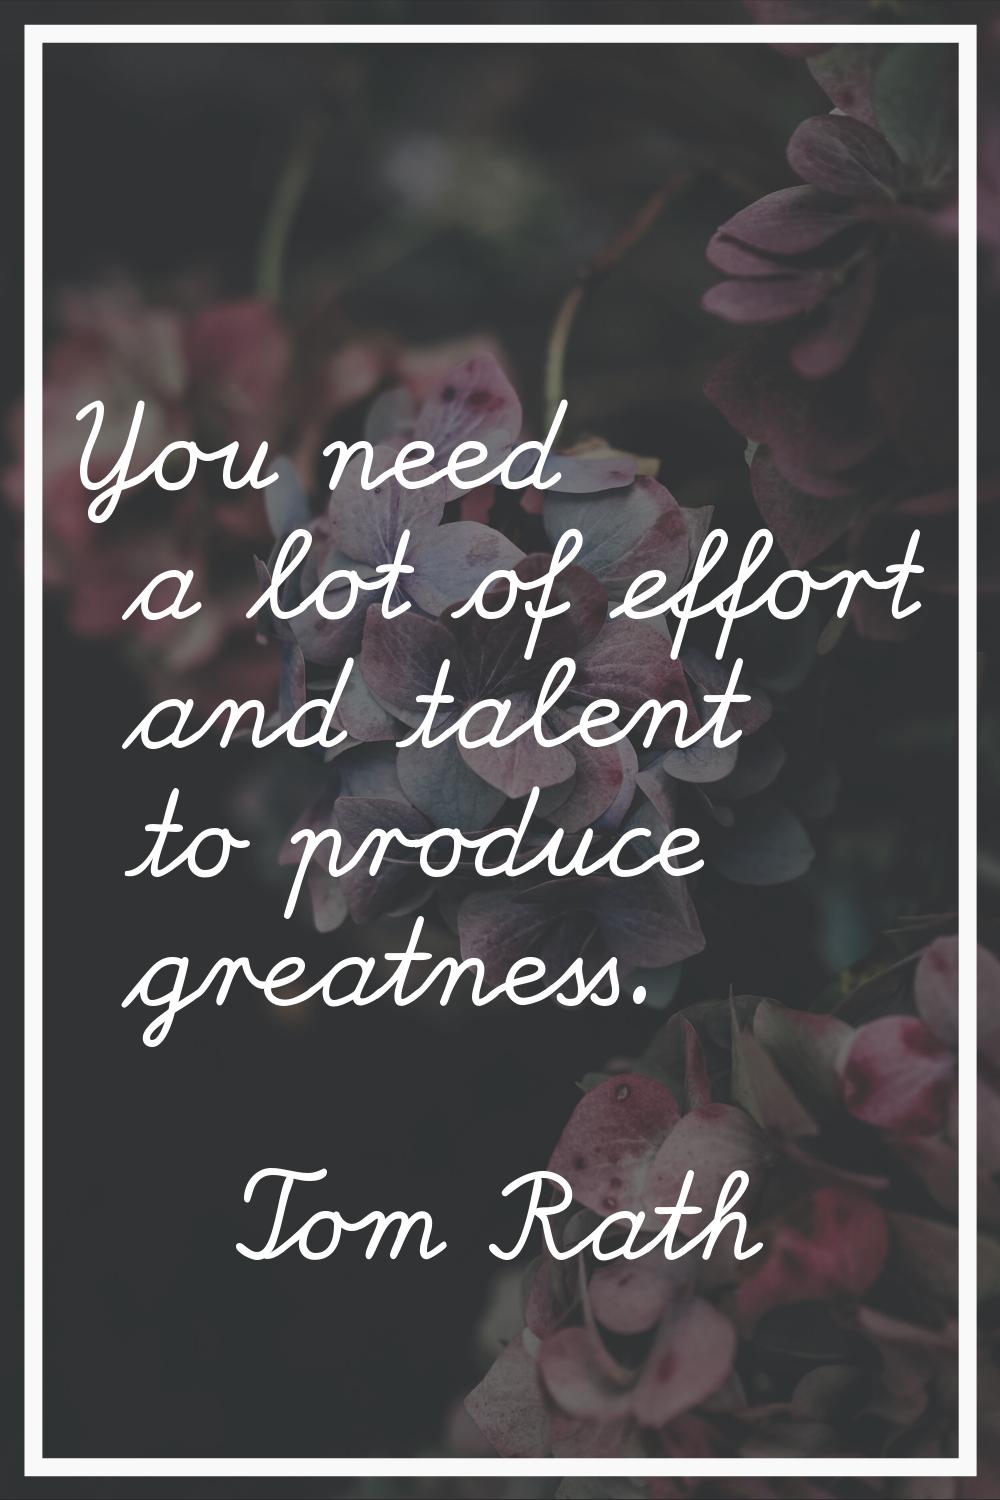 You need a lot of effort and talent to produce greatness.